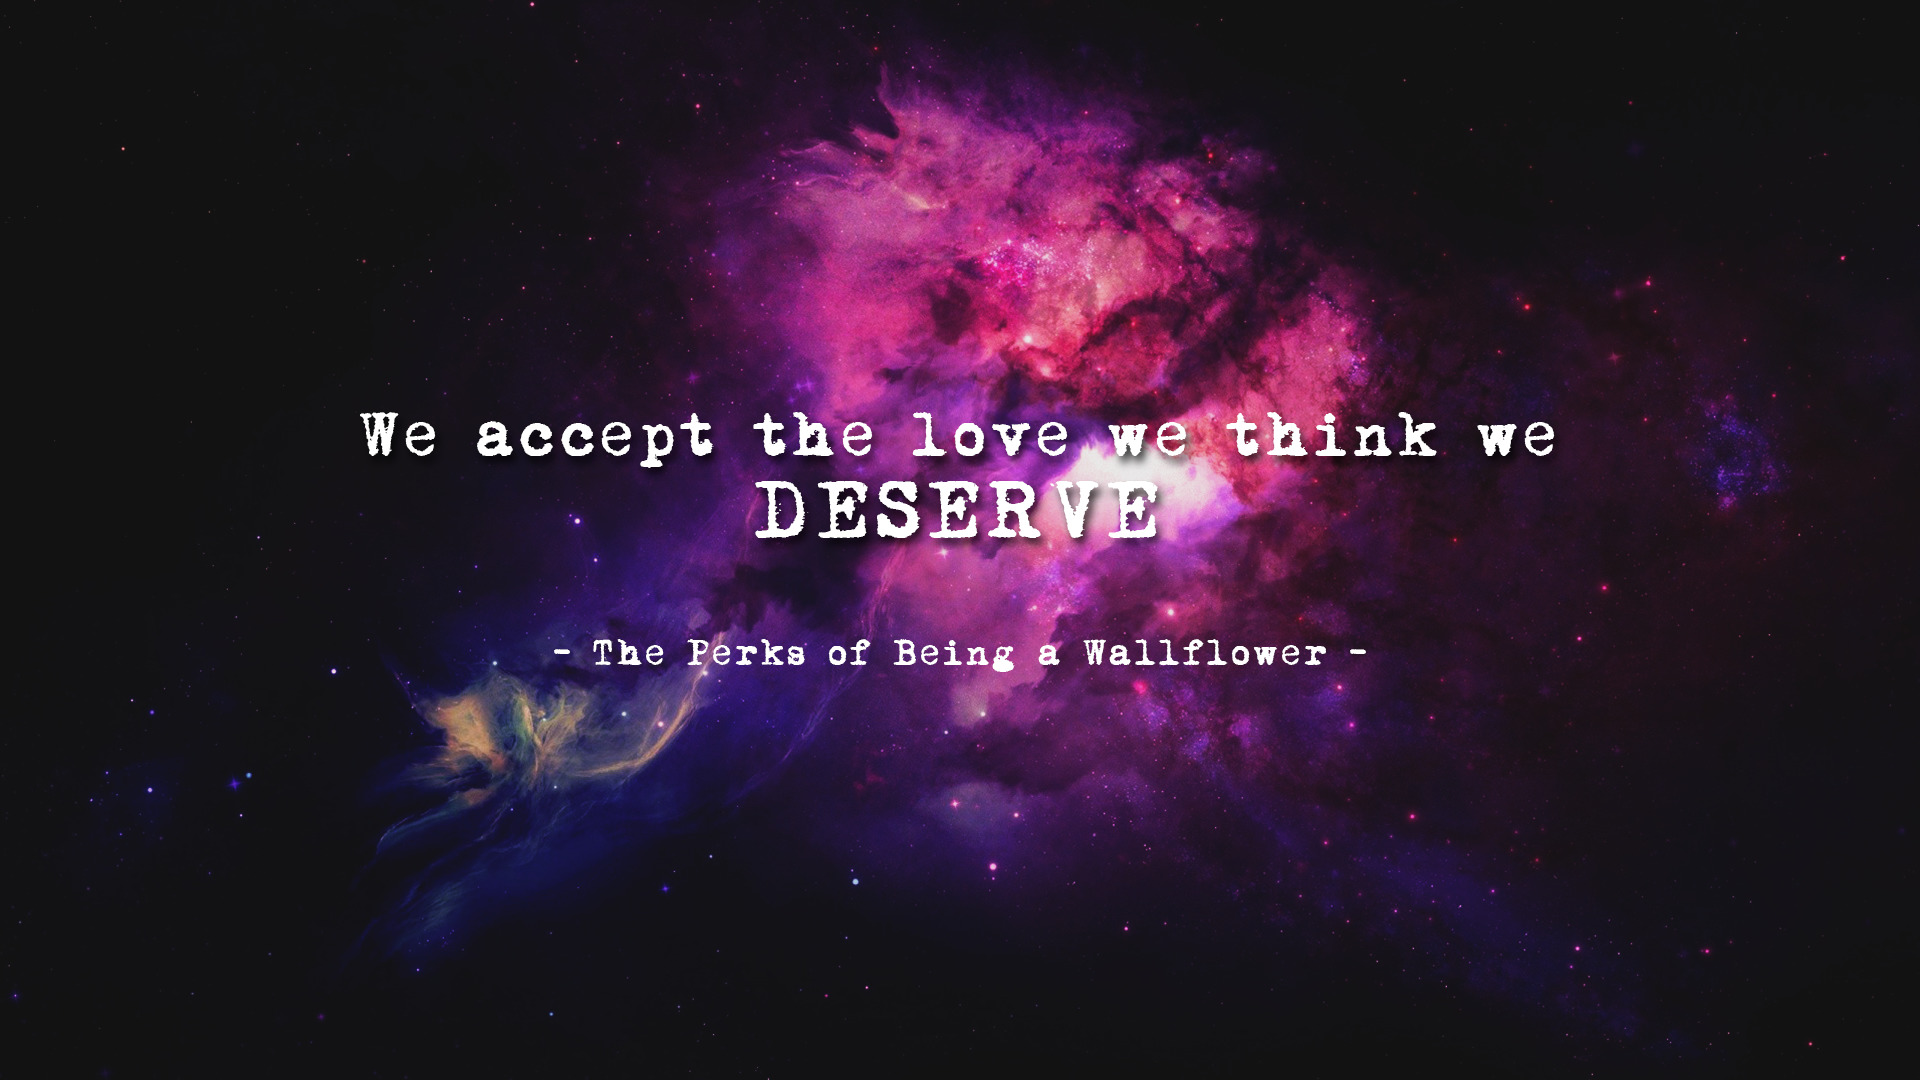 The perks of being a wallflower book free download youtube